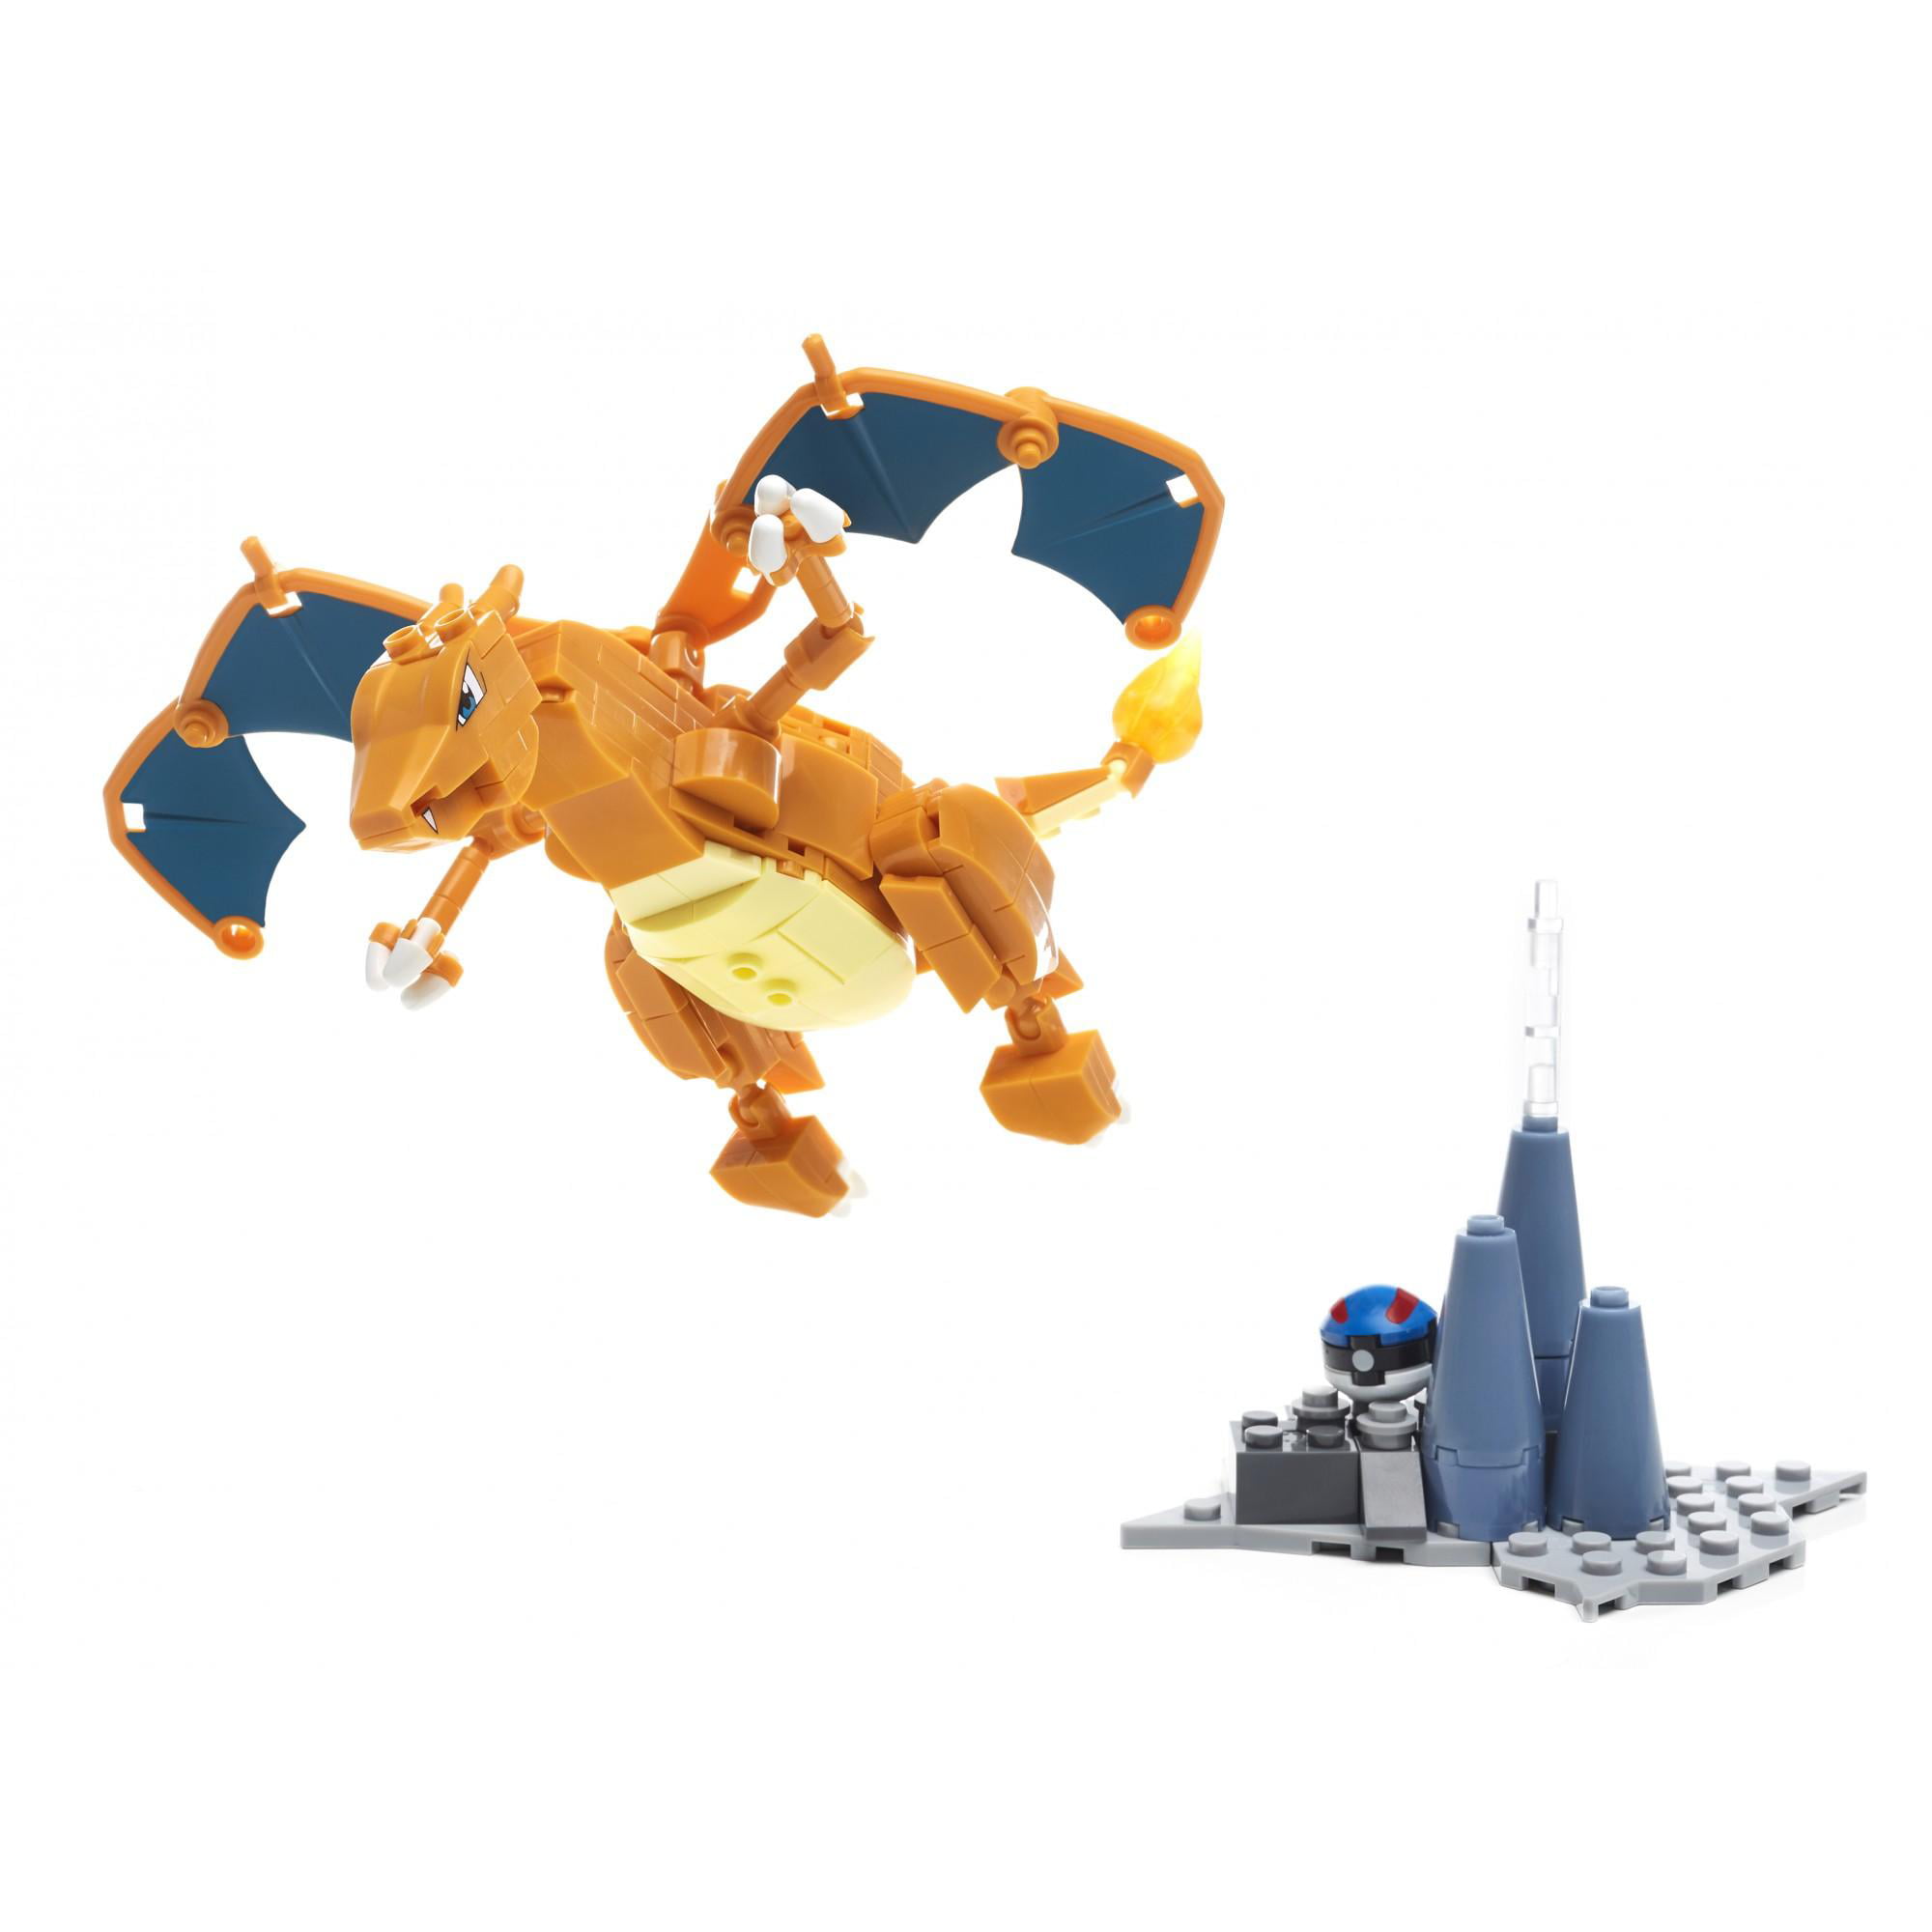 Mega Construx Pokemon Charizard Construction Set with character figures,  Building Toys for Kids (198 Pieces)